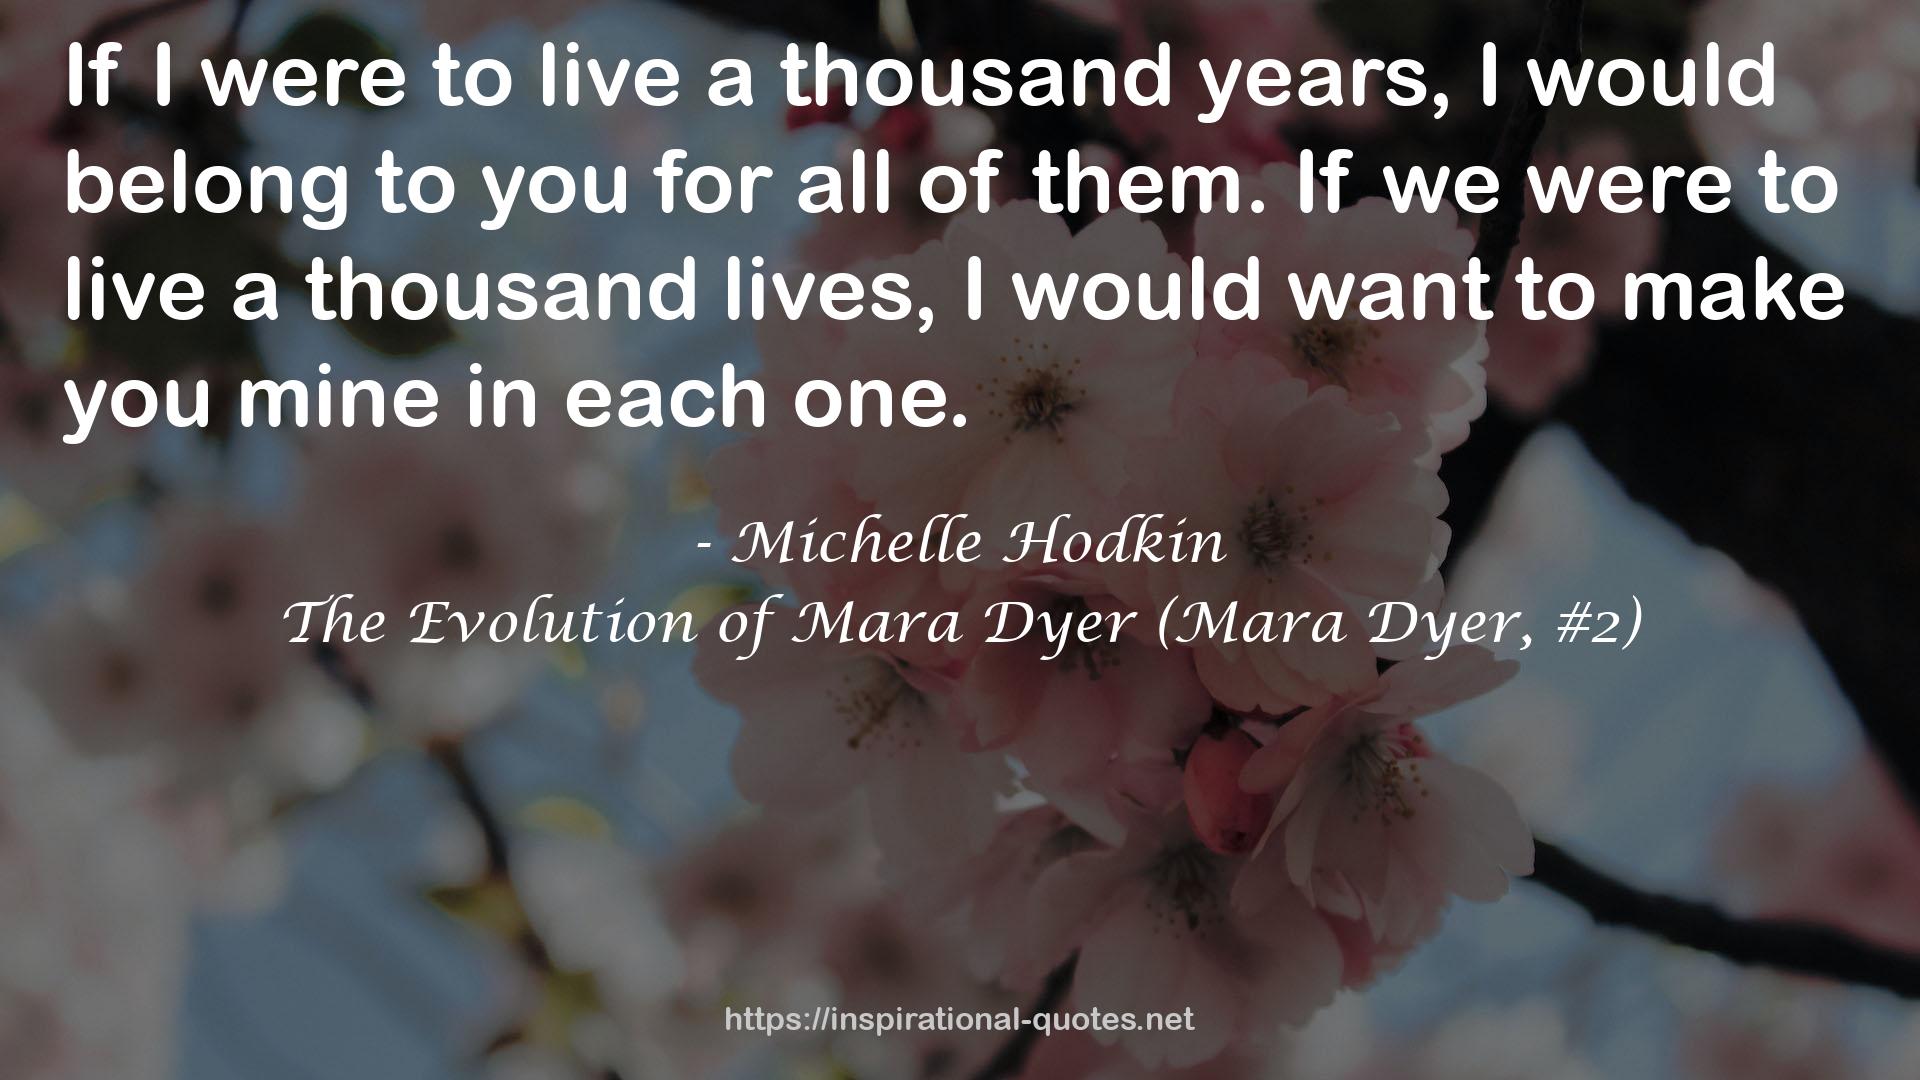 The Evolution of Mara Dyer (Mara Dyer, #2) QUOTES